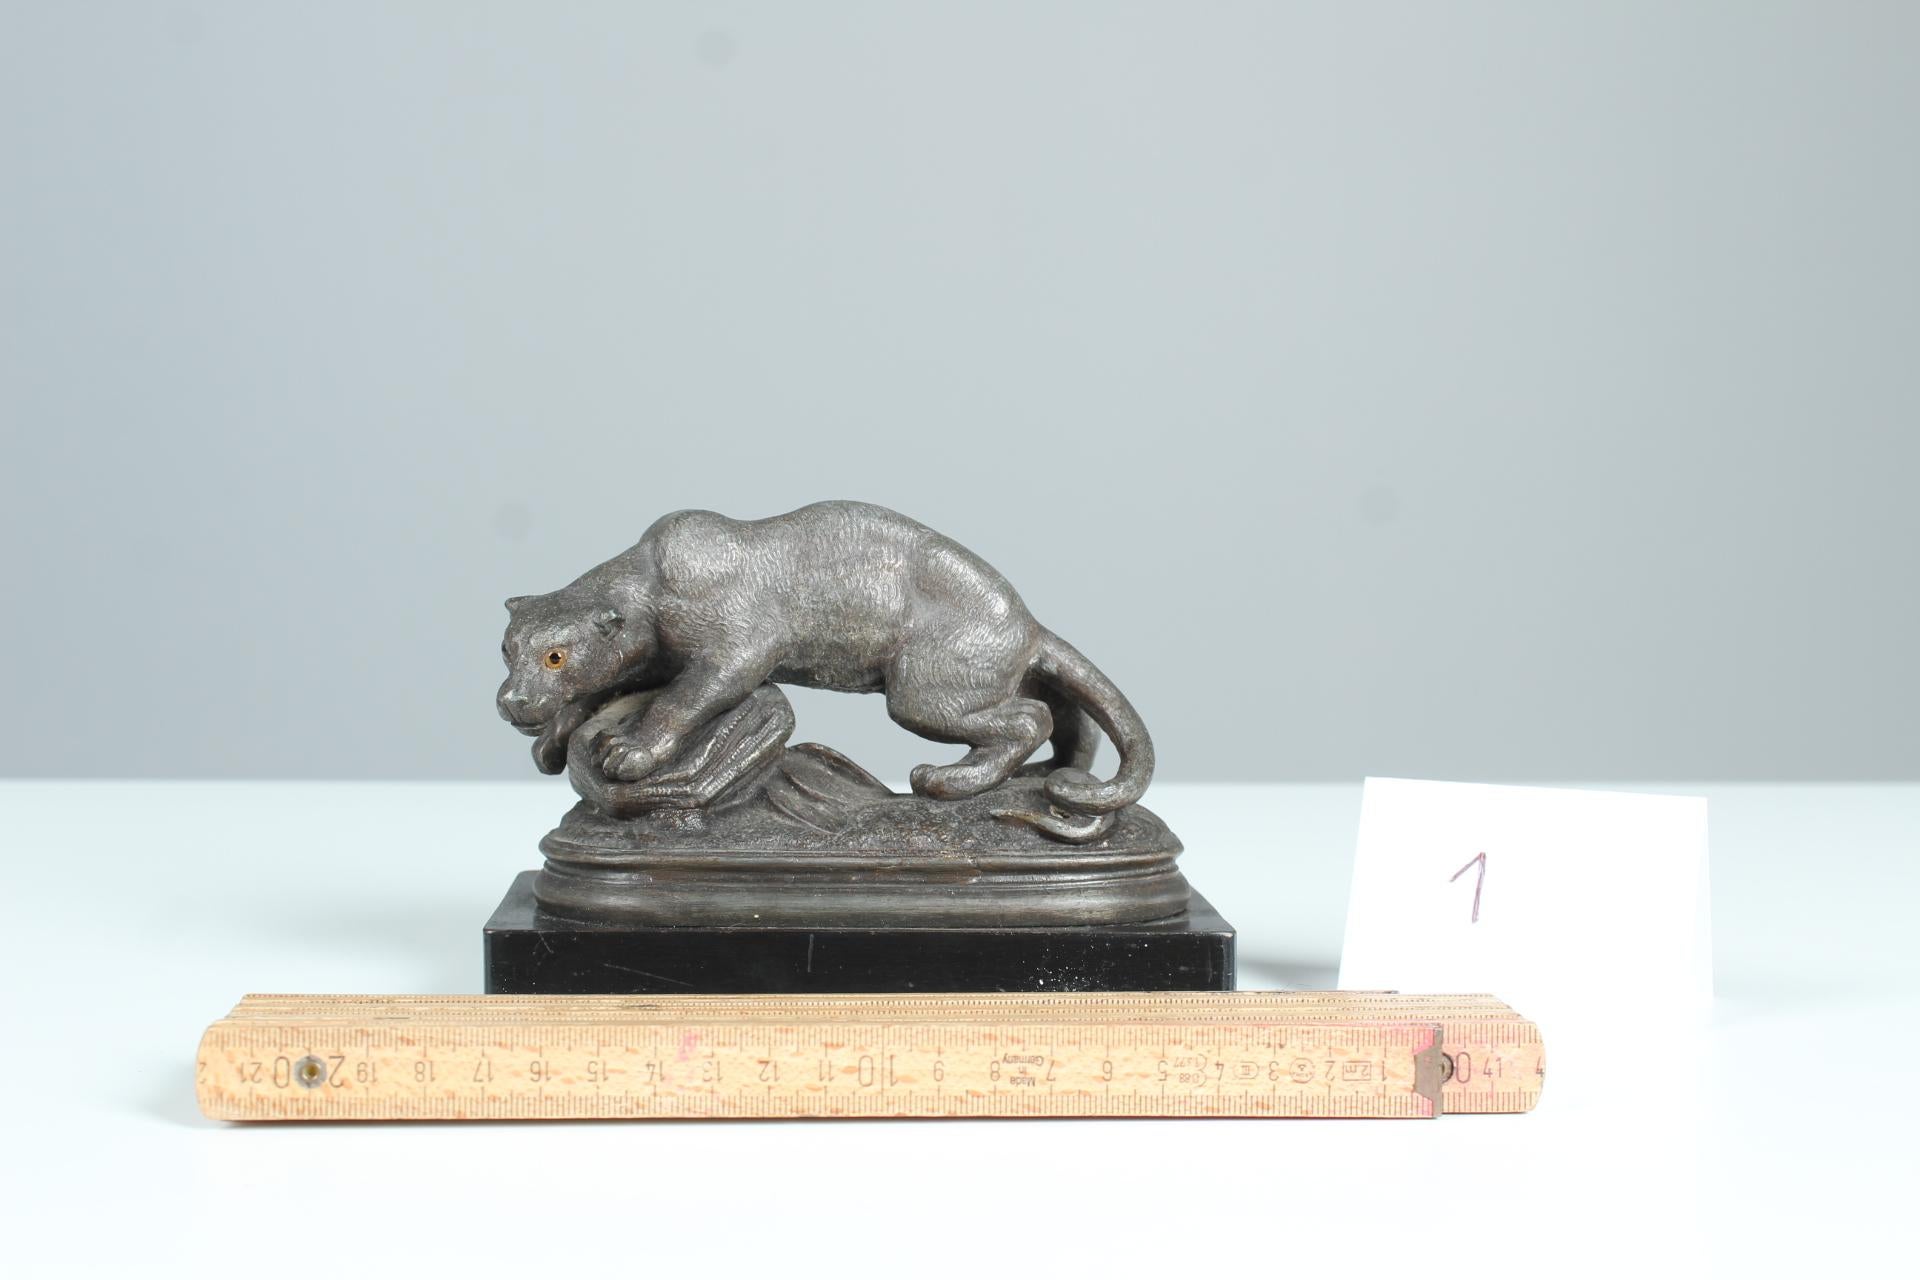 Antique bronze sculpture on lacquered wooden base.
Depiction of a panther on the prowl.
The dynamic elaboration gets a lively character through the glass eyes.

.